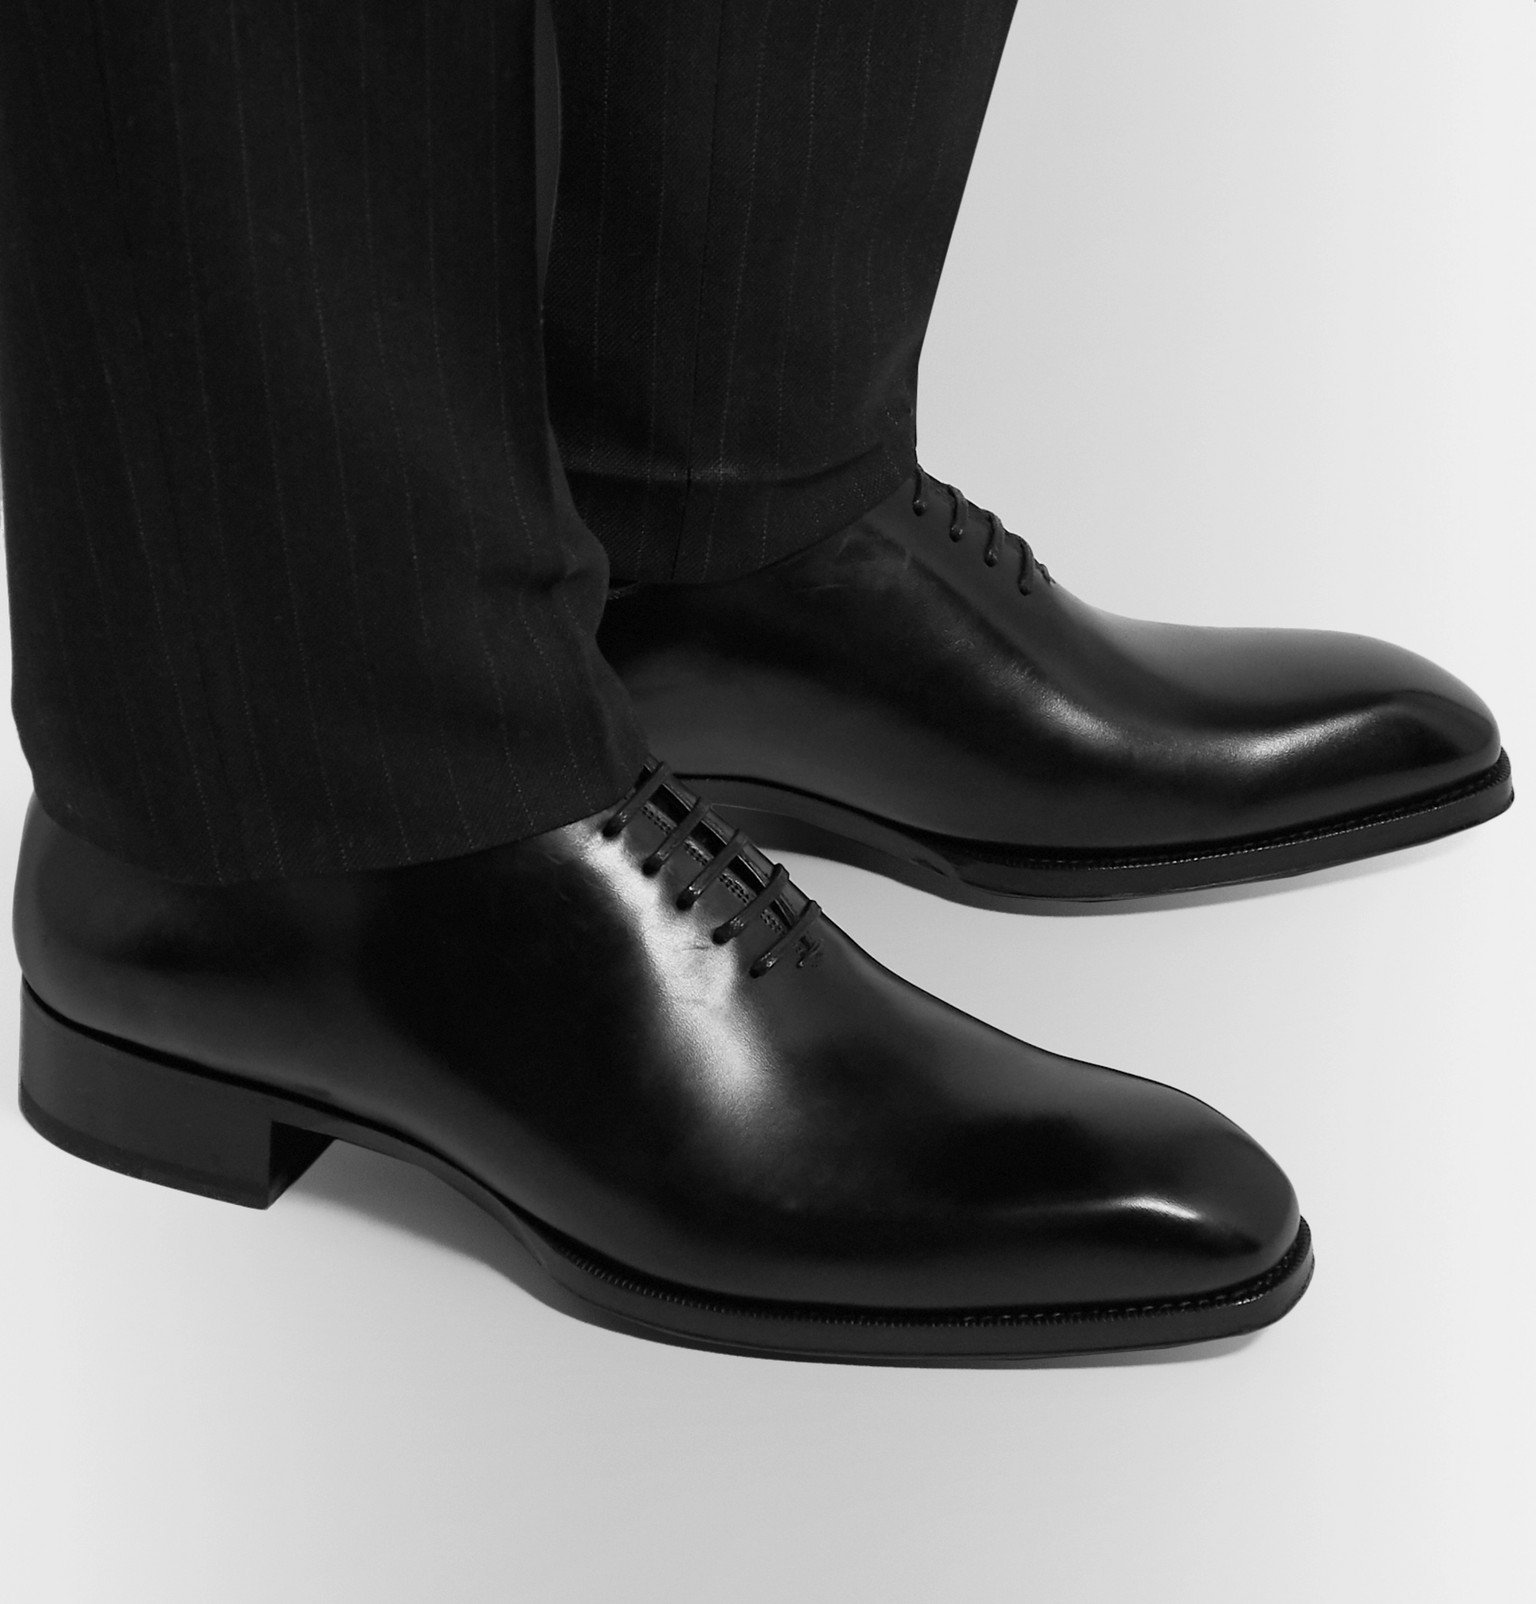 TOM FORD - Elkan Whole-Cut Polished-Leather Oxford Shoes - Black TOM FORD